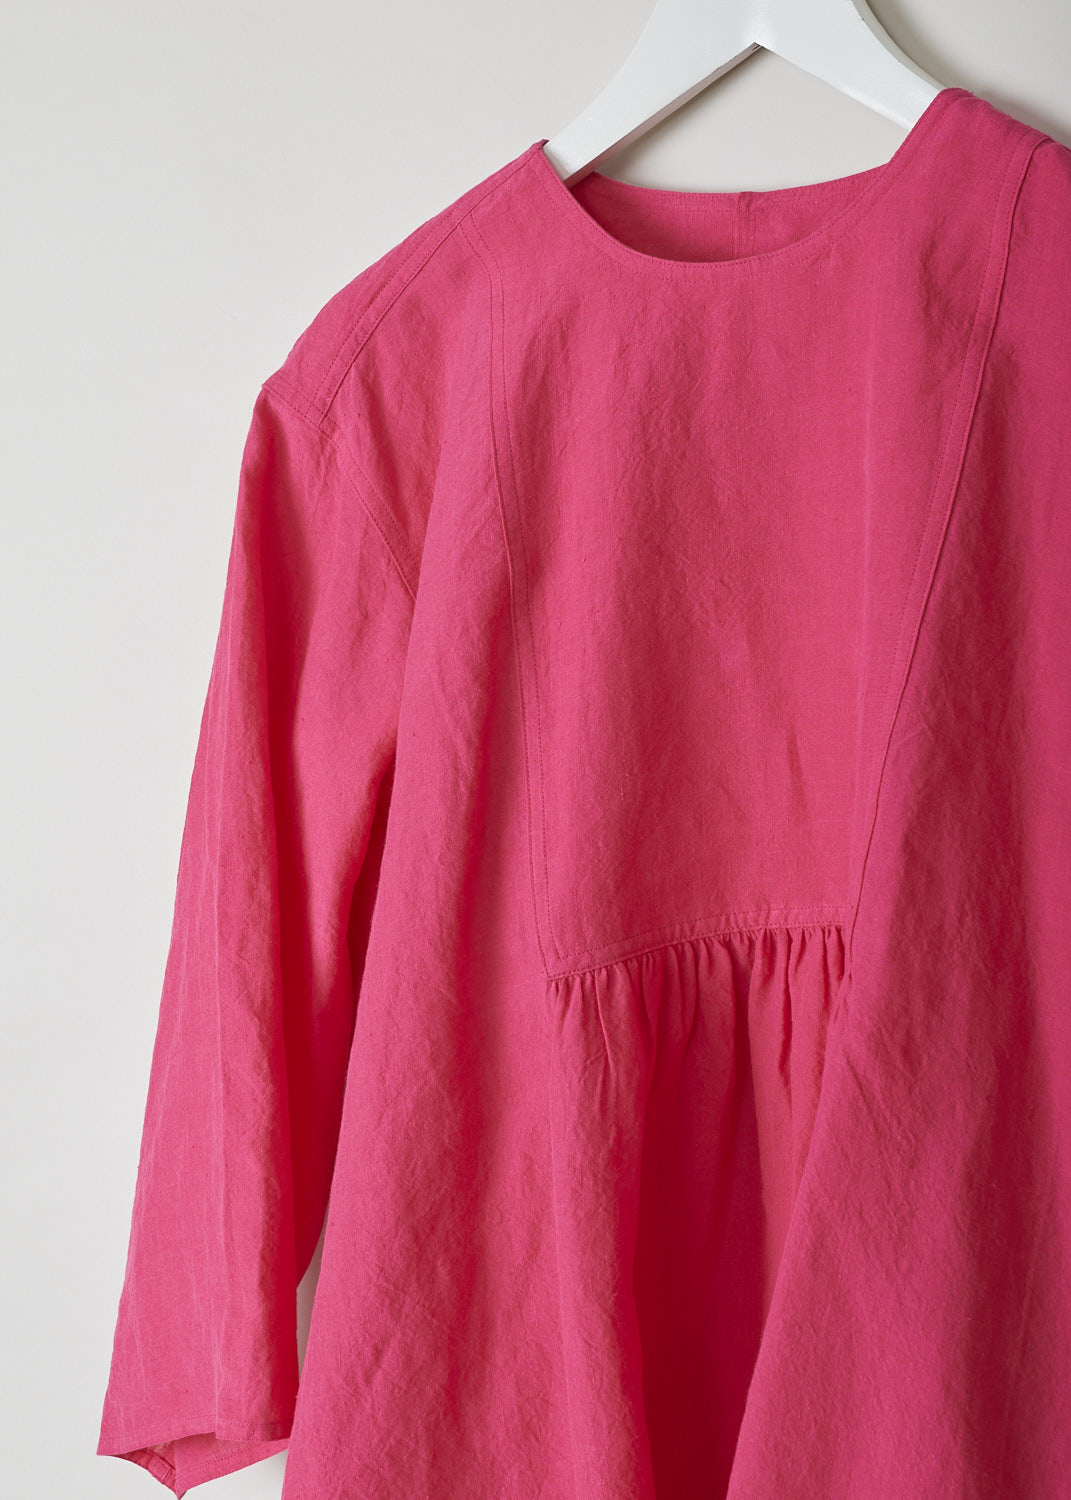 SOFIE D’HOORE, FUCHSIA COLORED BINETTE TOP, BINETTE_LIFE_FUCHSIA, Pink, Detail, This oversized fuchsia top features a round neckline, dropped shoulders and long sleeves. The A-line top has a square bib-like front with pleated details below. Concealed in the side seams, slanted pockets can be found. The top has an asymmetrical finish, meaning the back is a little longer than the front. 

